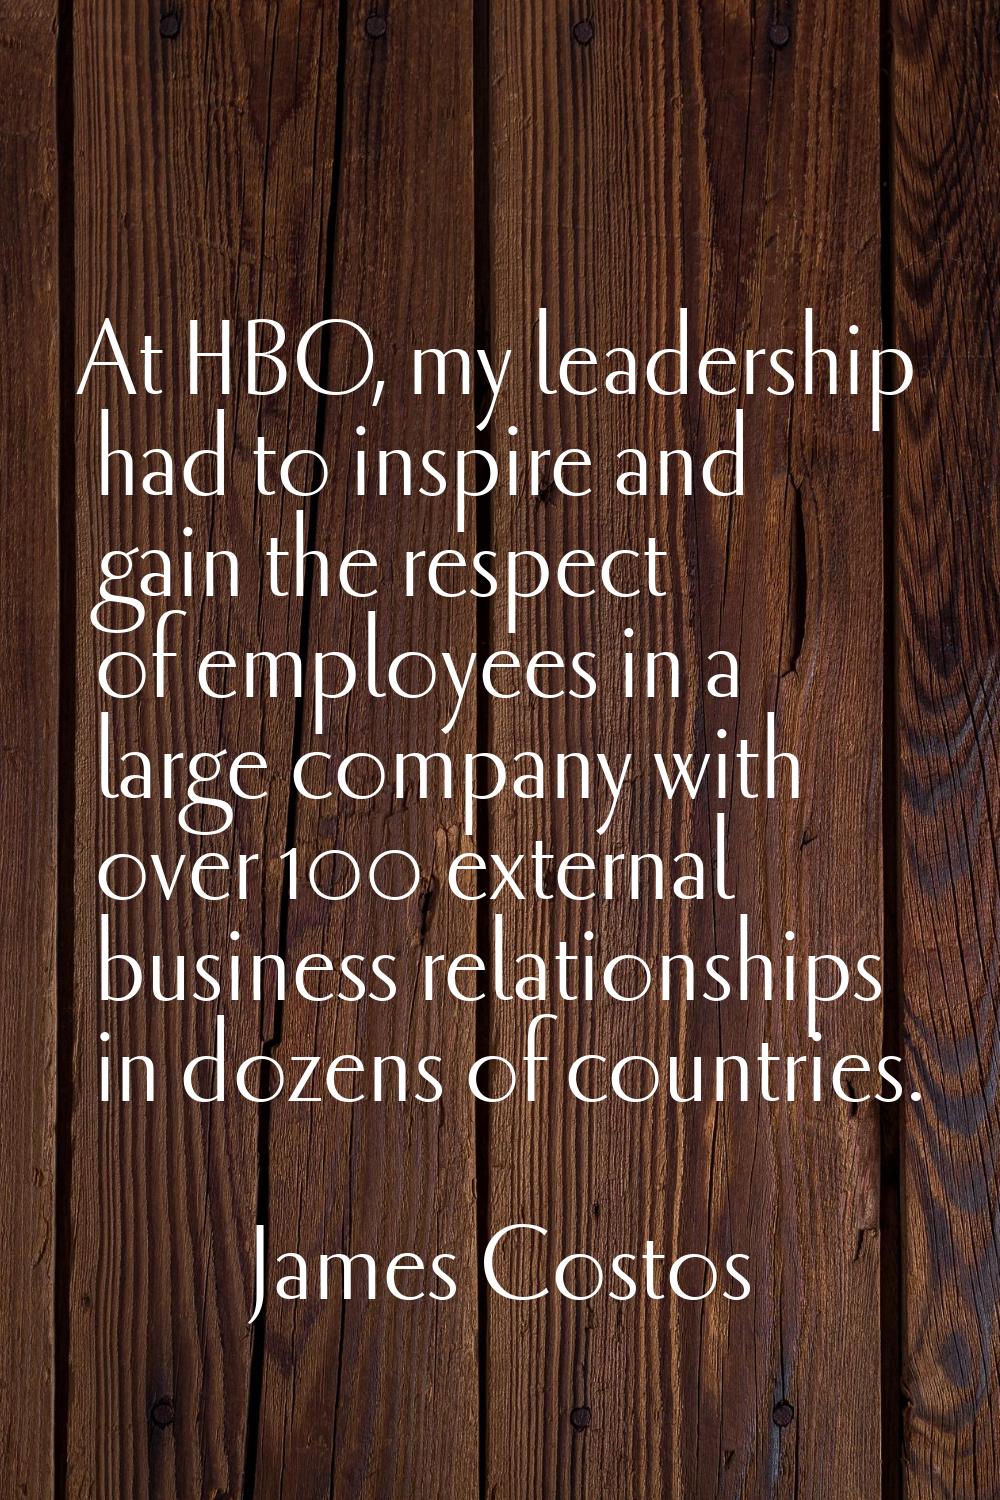 At HBO, my leadership had to inspire and gain the respect of employees in a large company with over